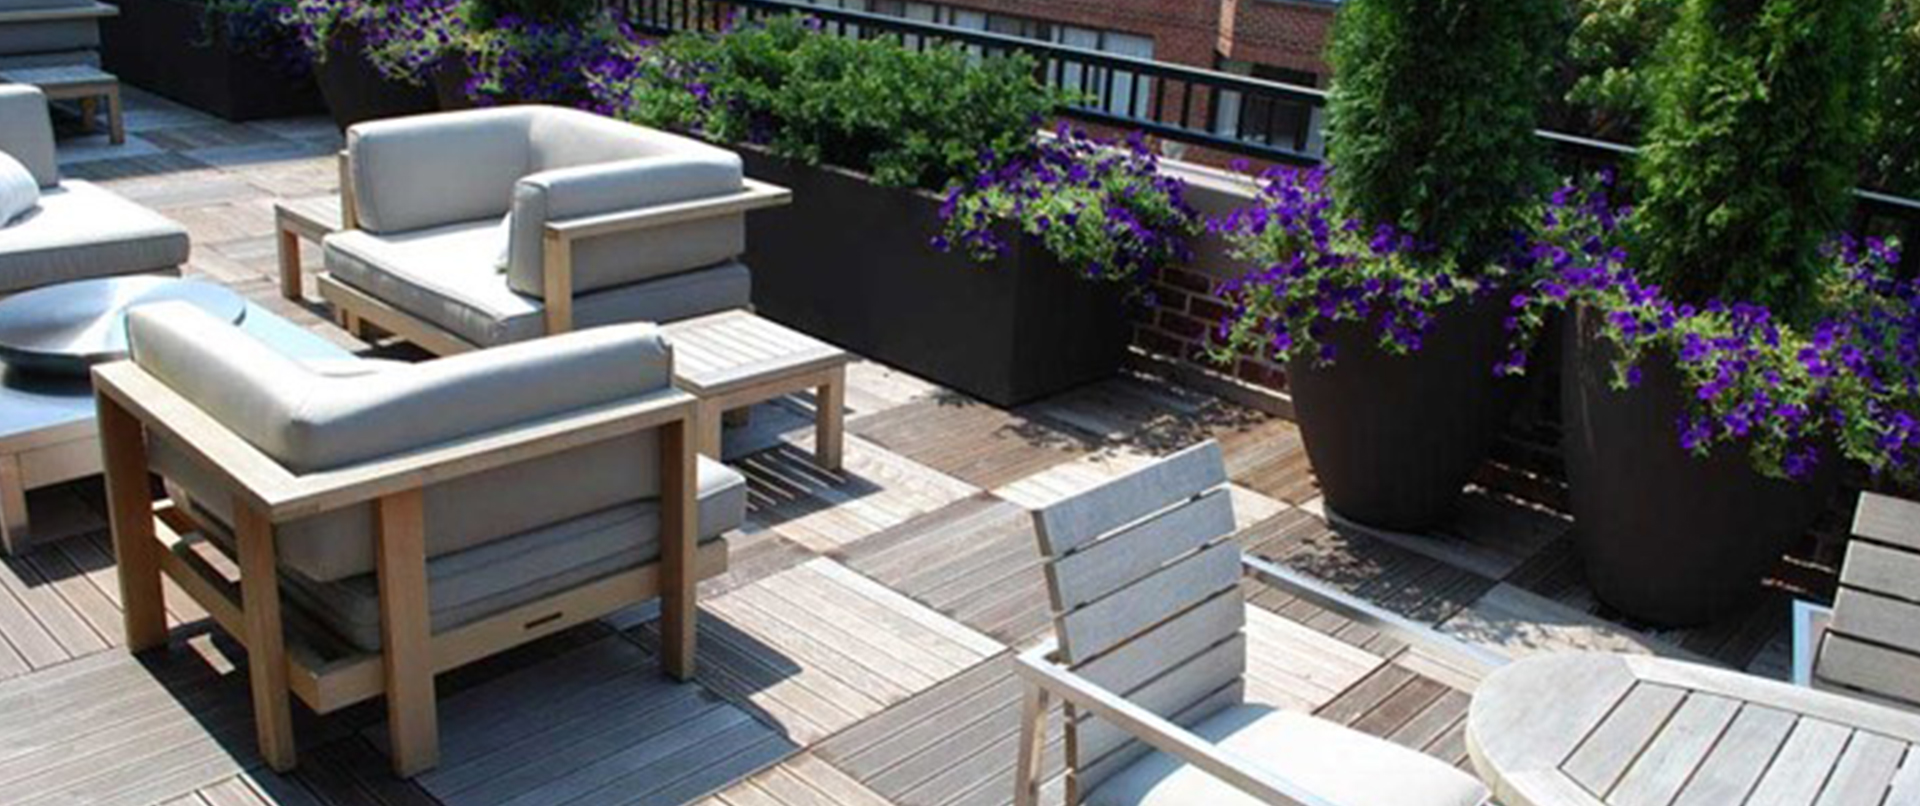 Private Wood Tile Decked Terrace